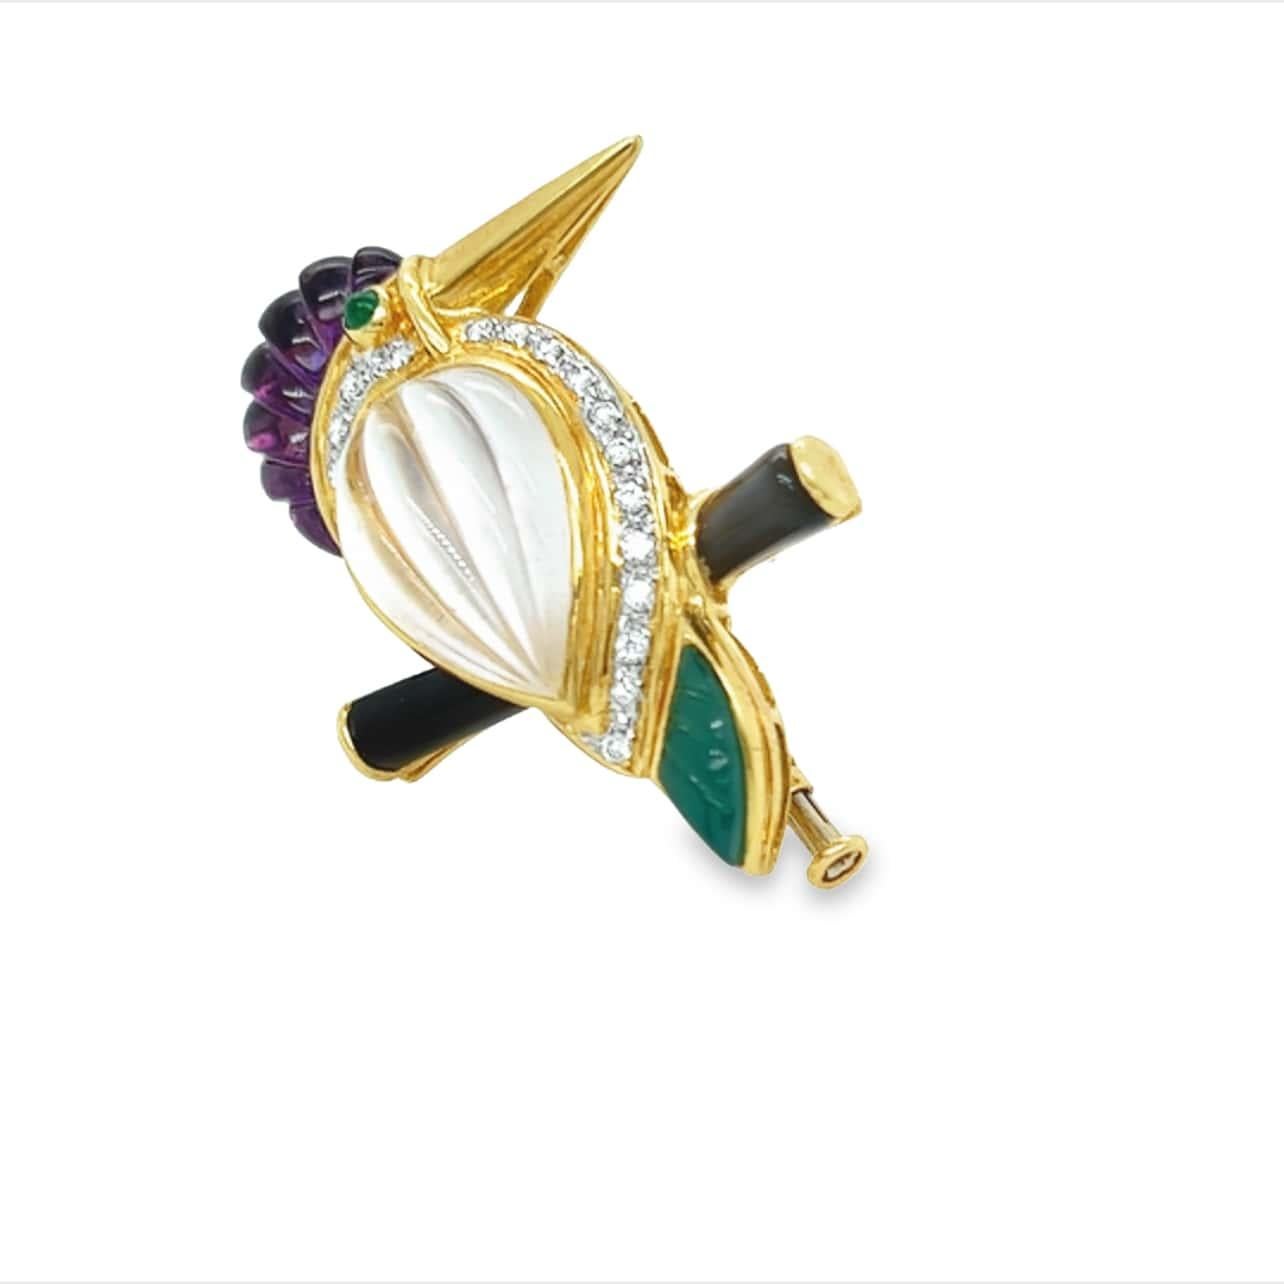 Intricately crafted gemstone and diamond parrot bird brooch. The detail and craftsmanship used in making this piece is substantial. The Rock Crystal Quartz body of the bird, Amethyst head and Chalcedony tail are all etched gems. The bird is made an